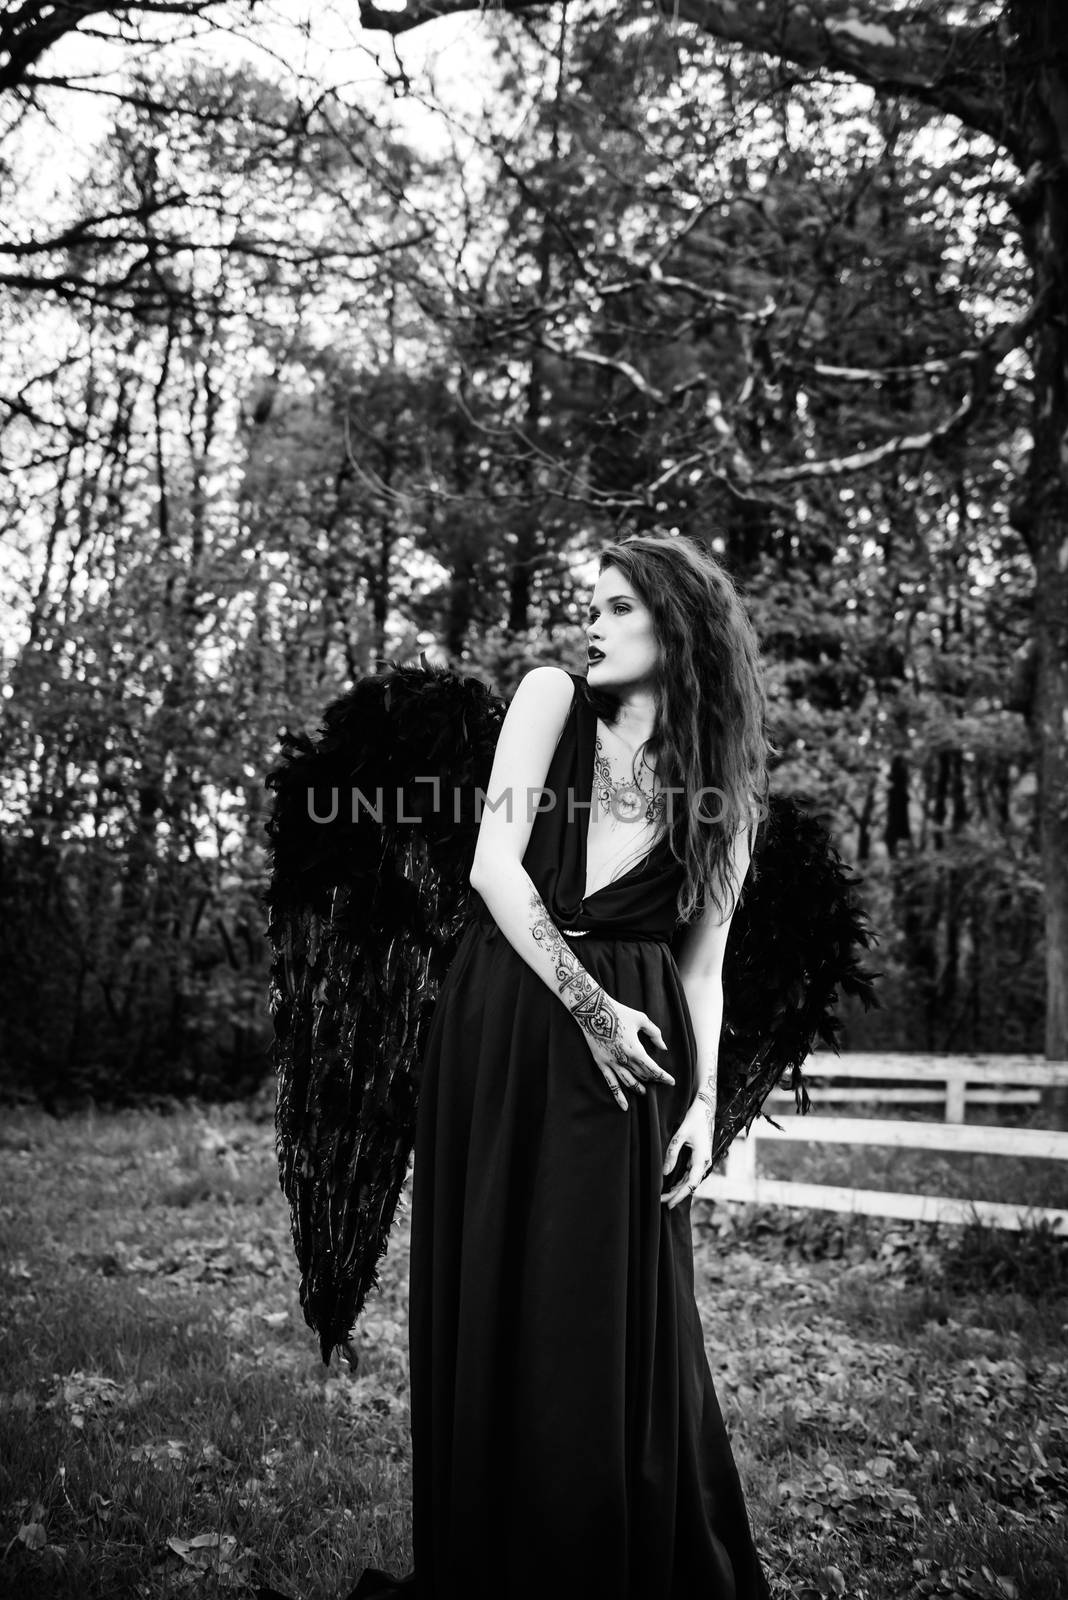 Fallen angel with black wings by Andreua